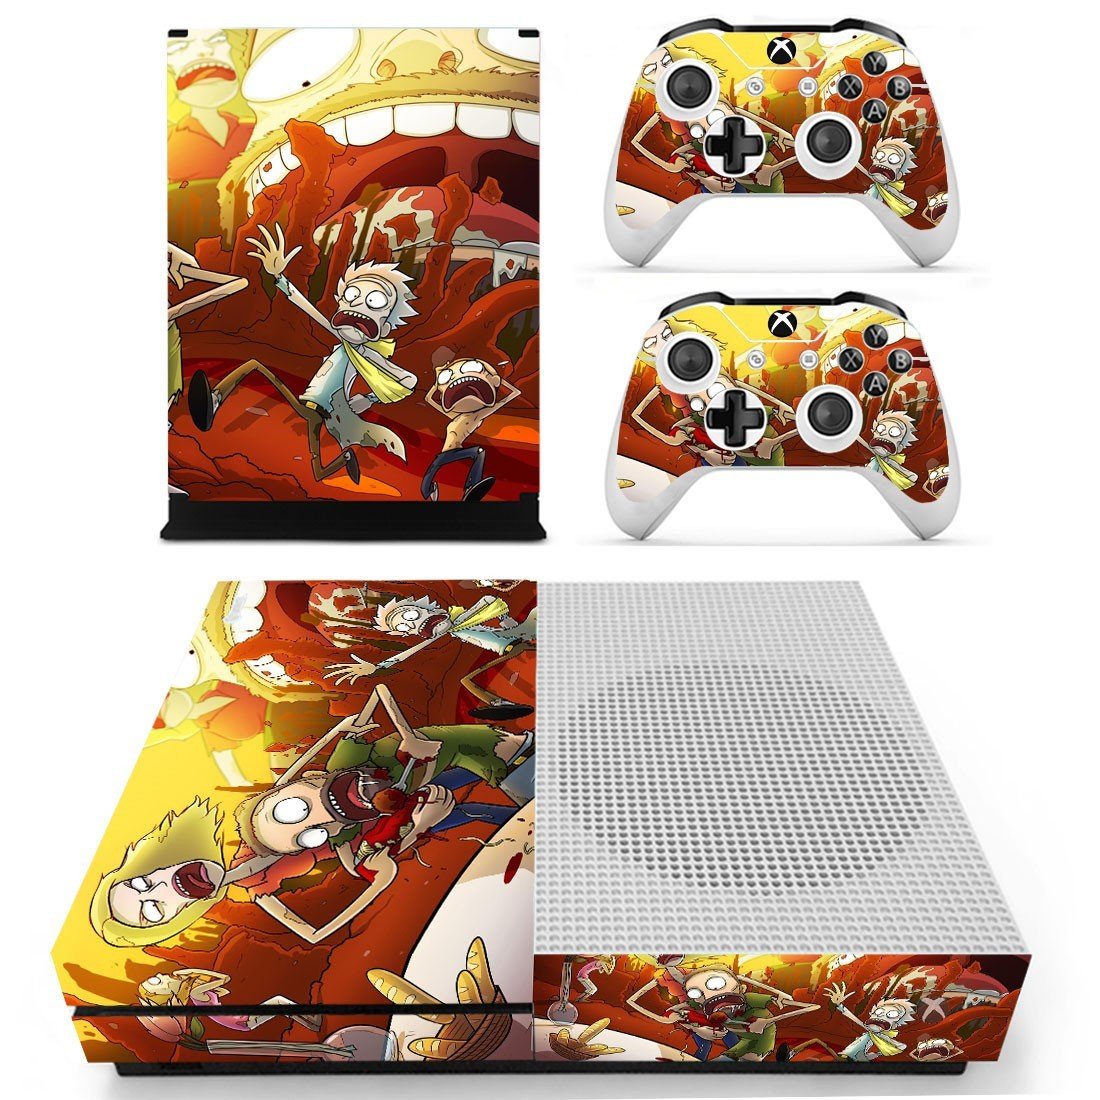 Skin Cover for Xbox One S - Rick and Morty Design 10